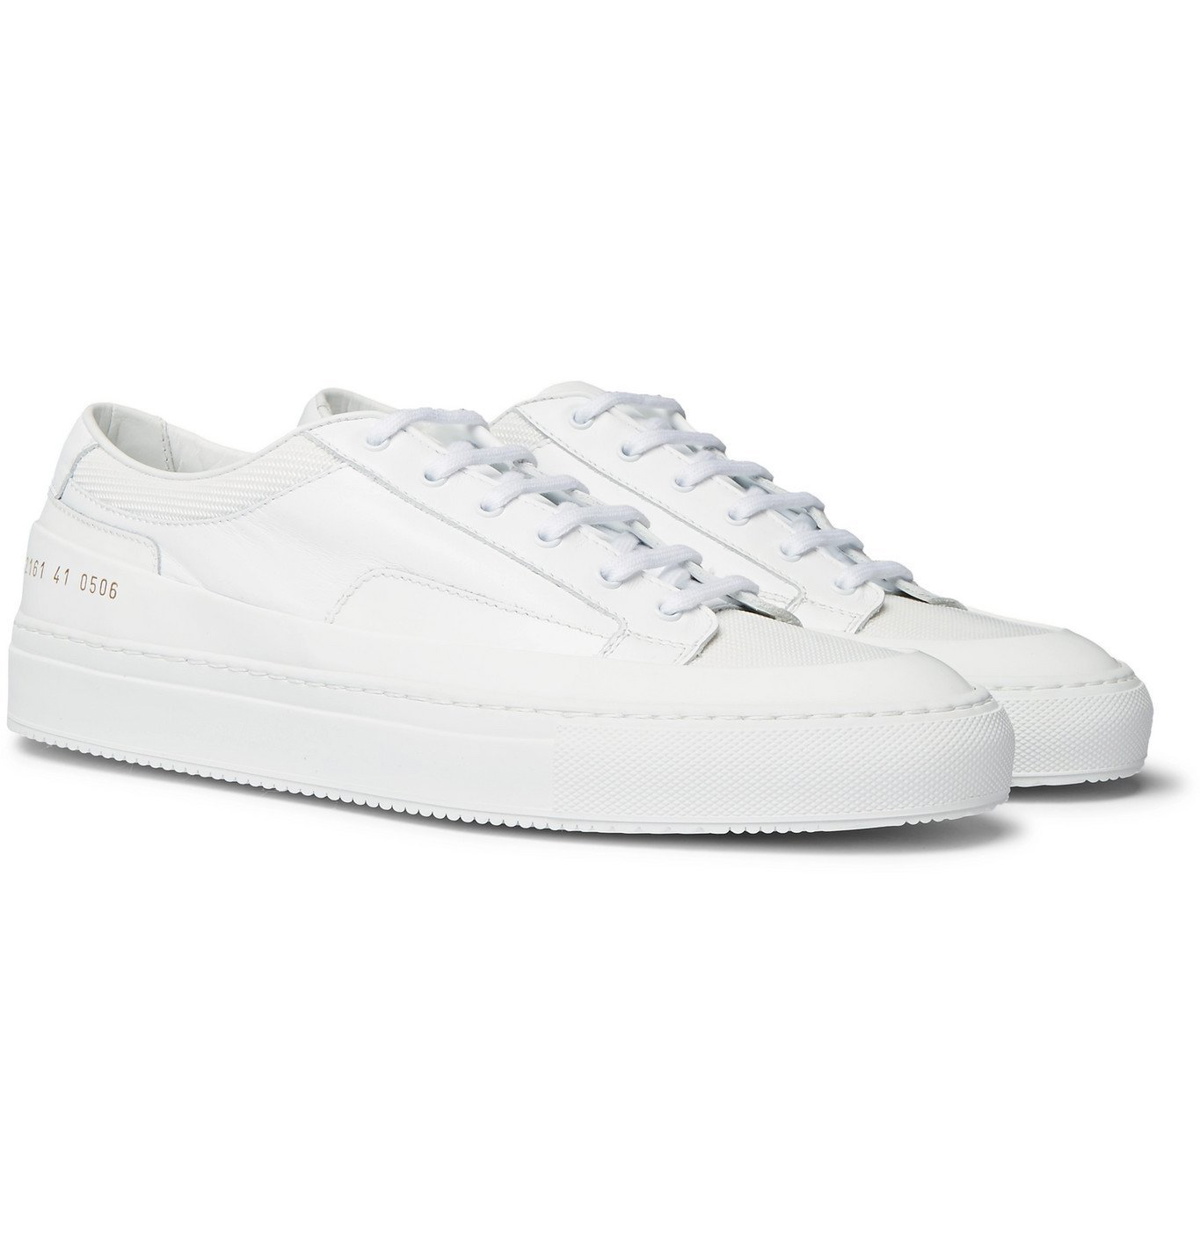 Common Projects - Achilles Super Mesh-Trimmed Leather Sneakers - White ...